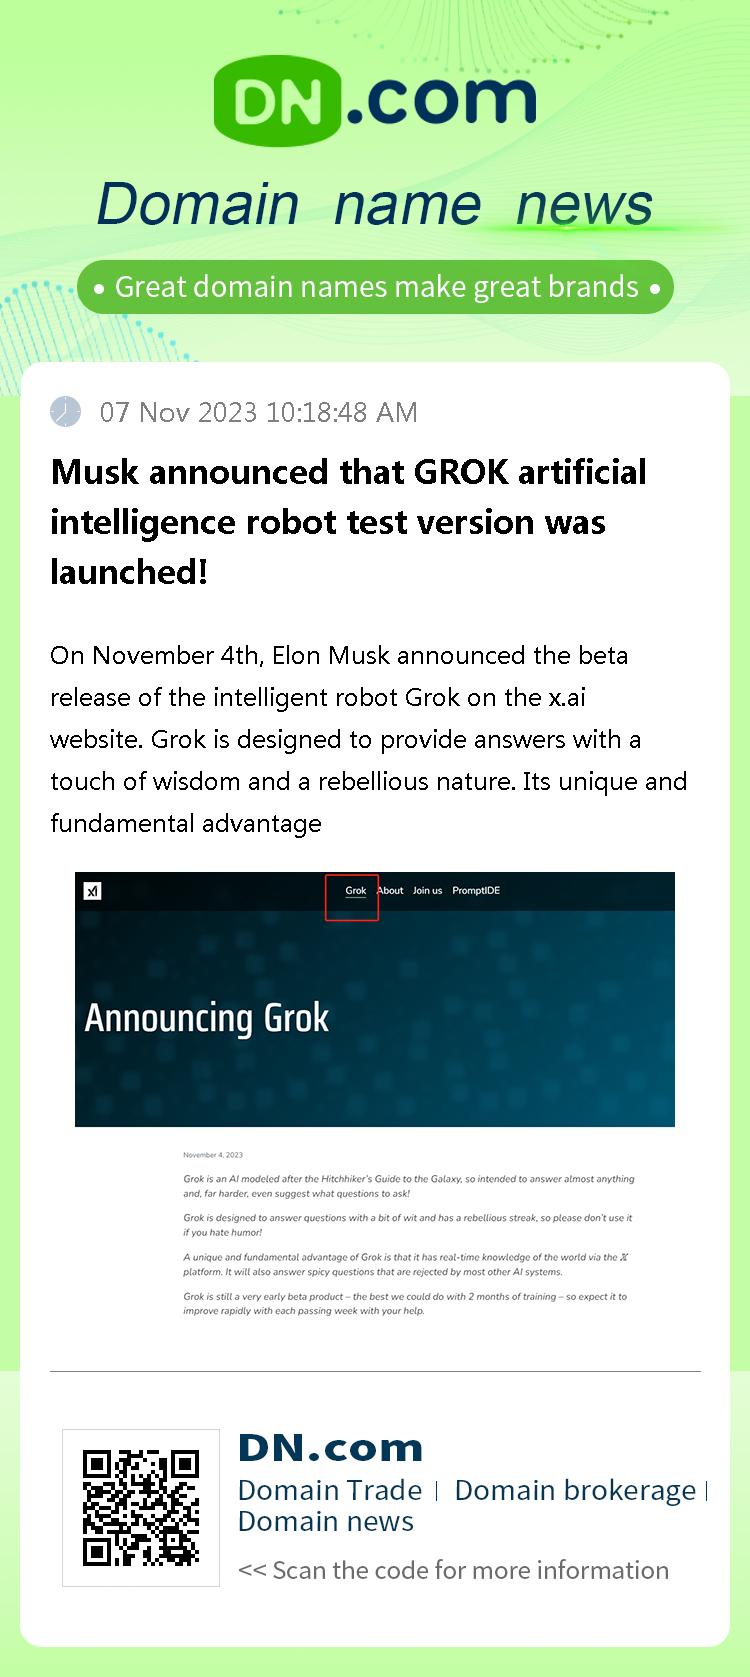 Musk announced that GROK artificial intelligence robot test version was launched!